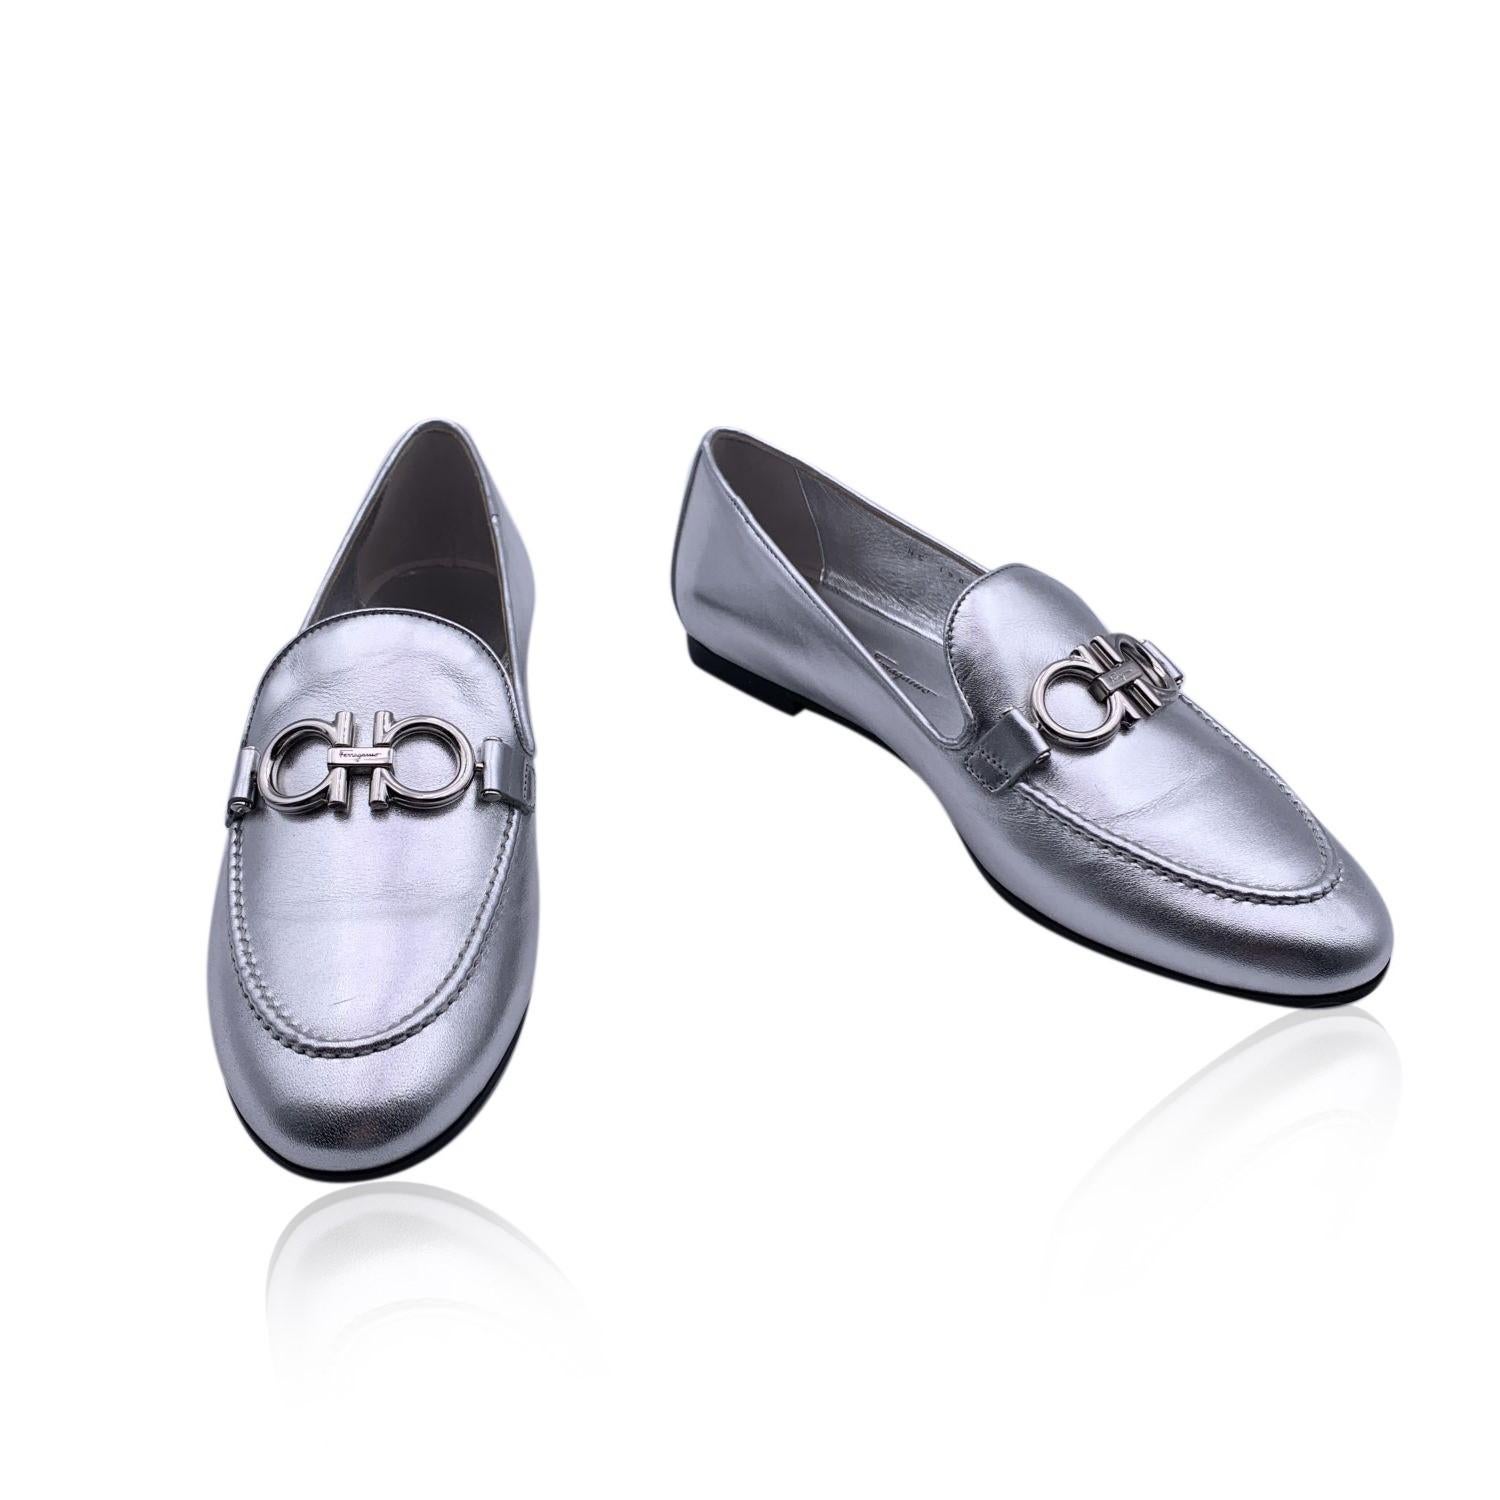 Beautiful Salvatore Ferragamo 'Trifoglio' Moccassins Loafers Shoes. Crafted in silver-tone leather. They feature an almond toe, silver metal Gancini detailing on the toes and slip-on design. Rubber sole. Heels height: 1cm. Made in Italy. Size: US